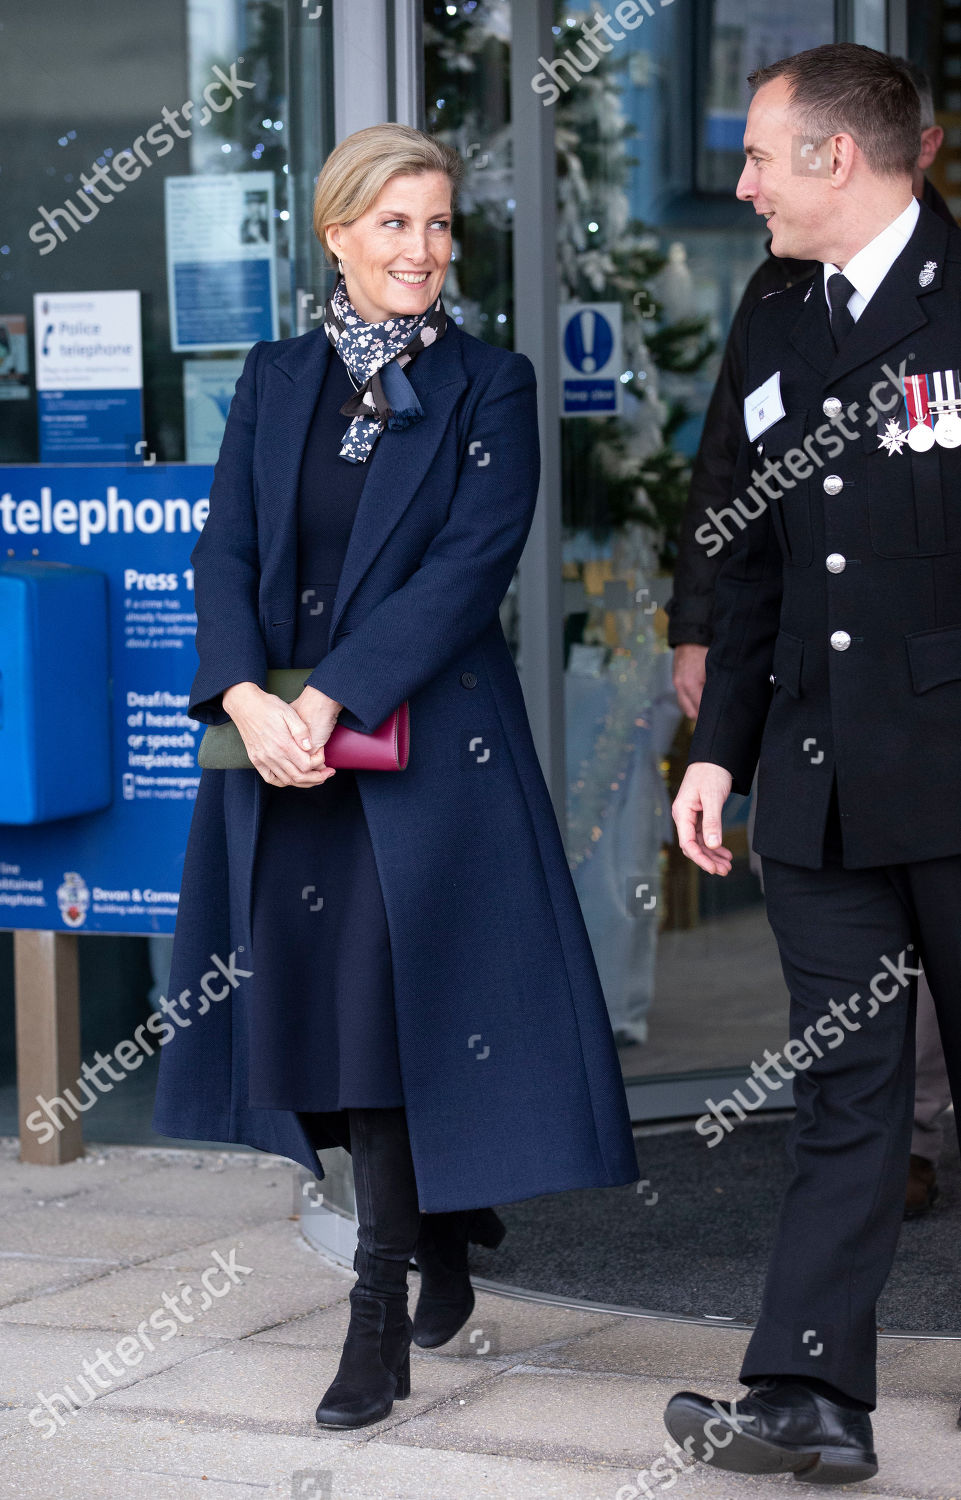 sophie-countess-of-wessex-visit-to-cornwall-uk-shutterstock-editorial-10013548ah.jpg